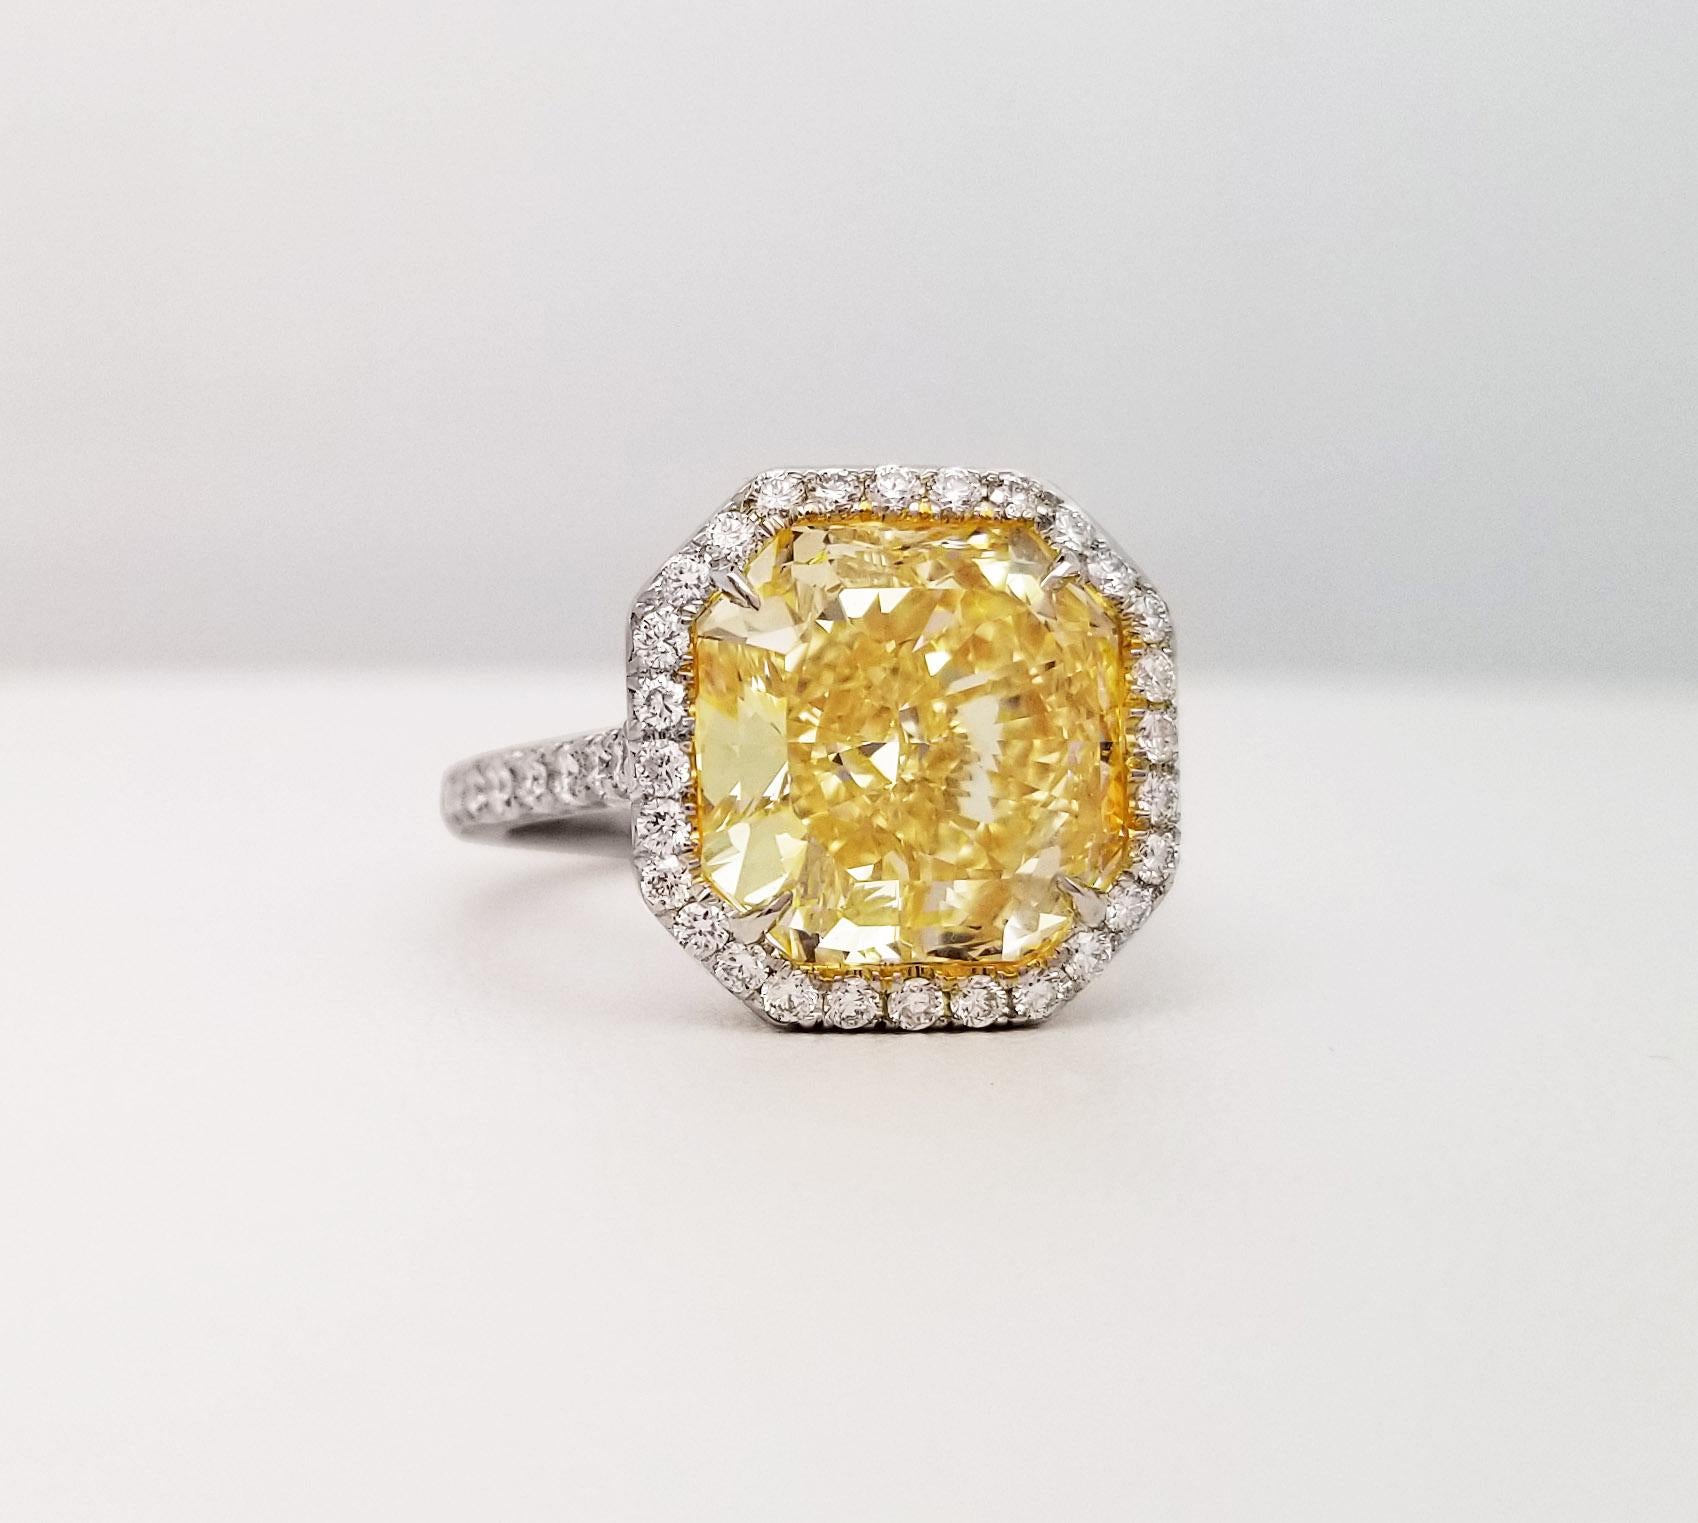 From SCARSELLI, this spectacular 6 carats Fancy Yellow Diamond Internally flawless GIA-certified haloing by round white diamonds that spread down on the shank's sides totaling 1.13 carats (see certificate picture for detailed stone's information).